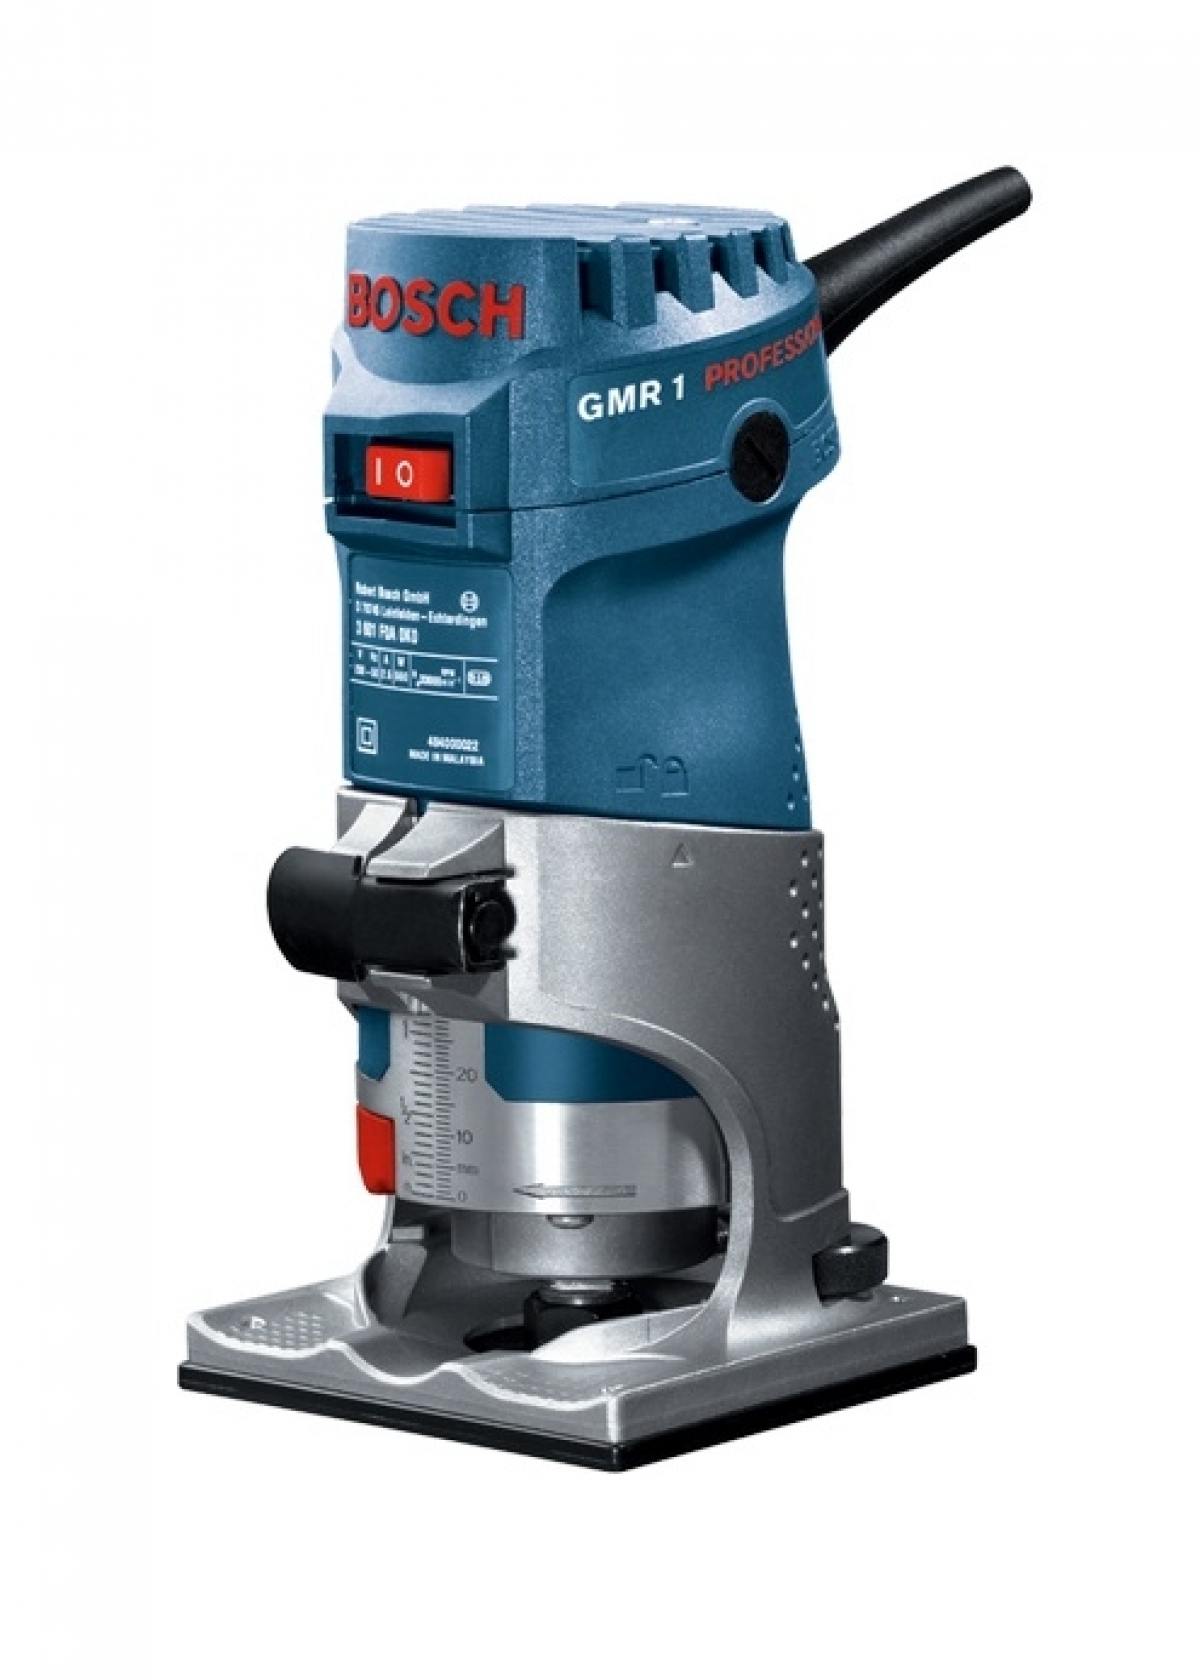 Bosch GMR 550W Palm Router Trimmer MY Power Tools